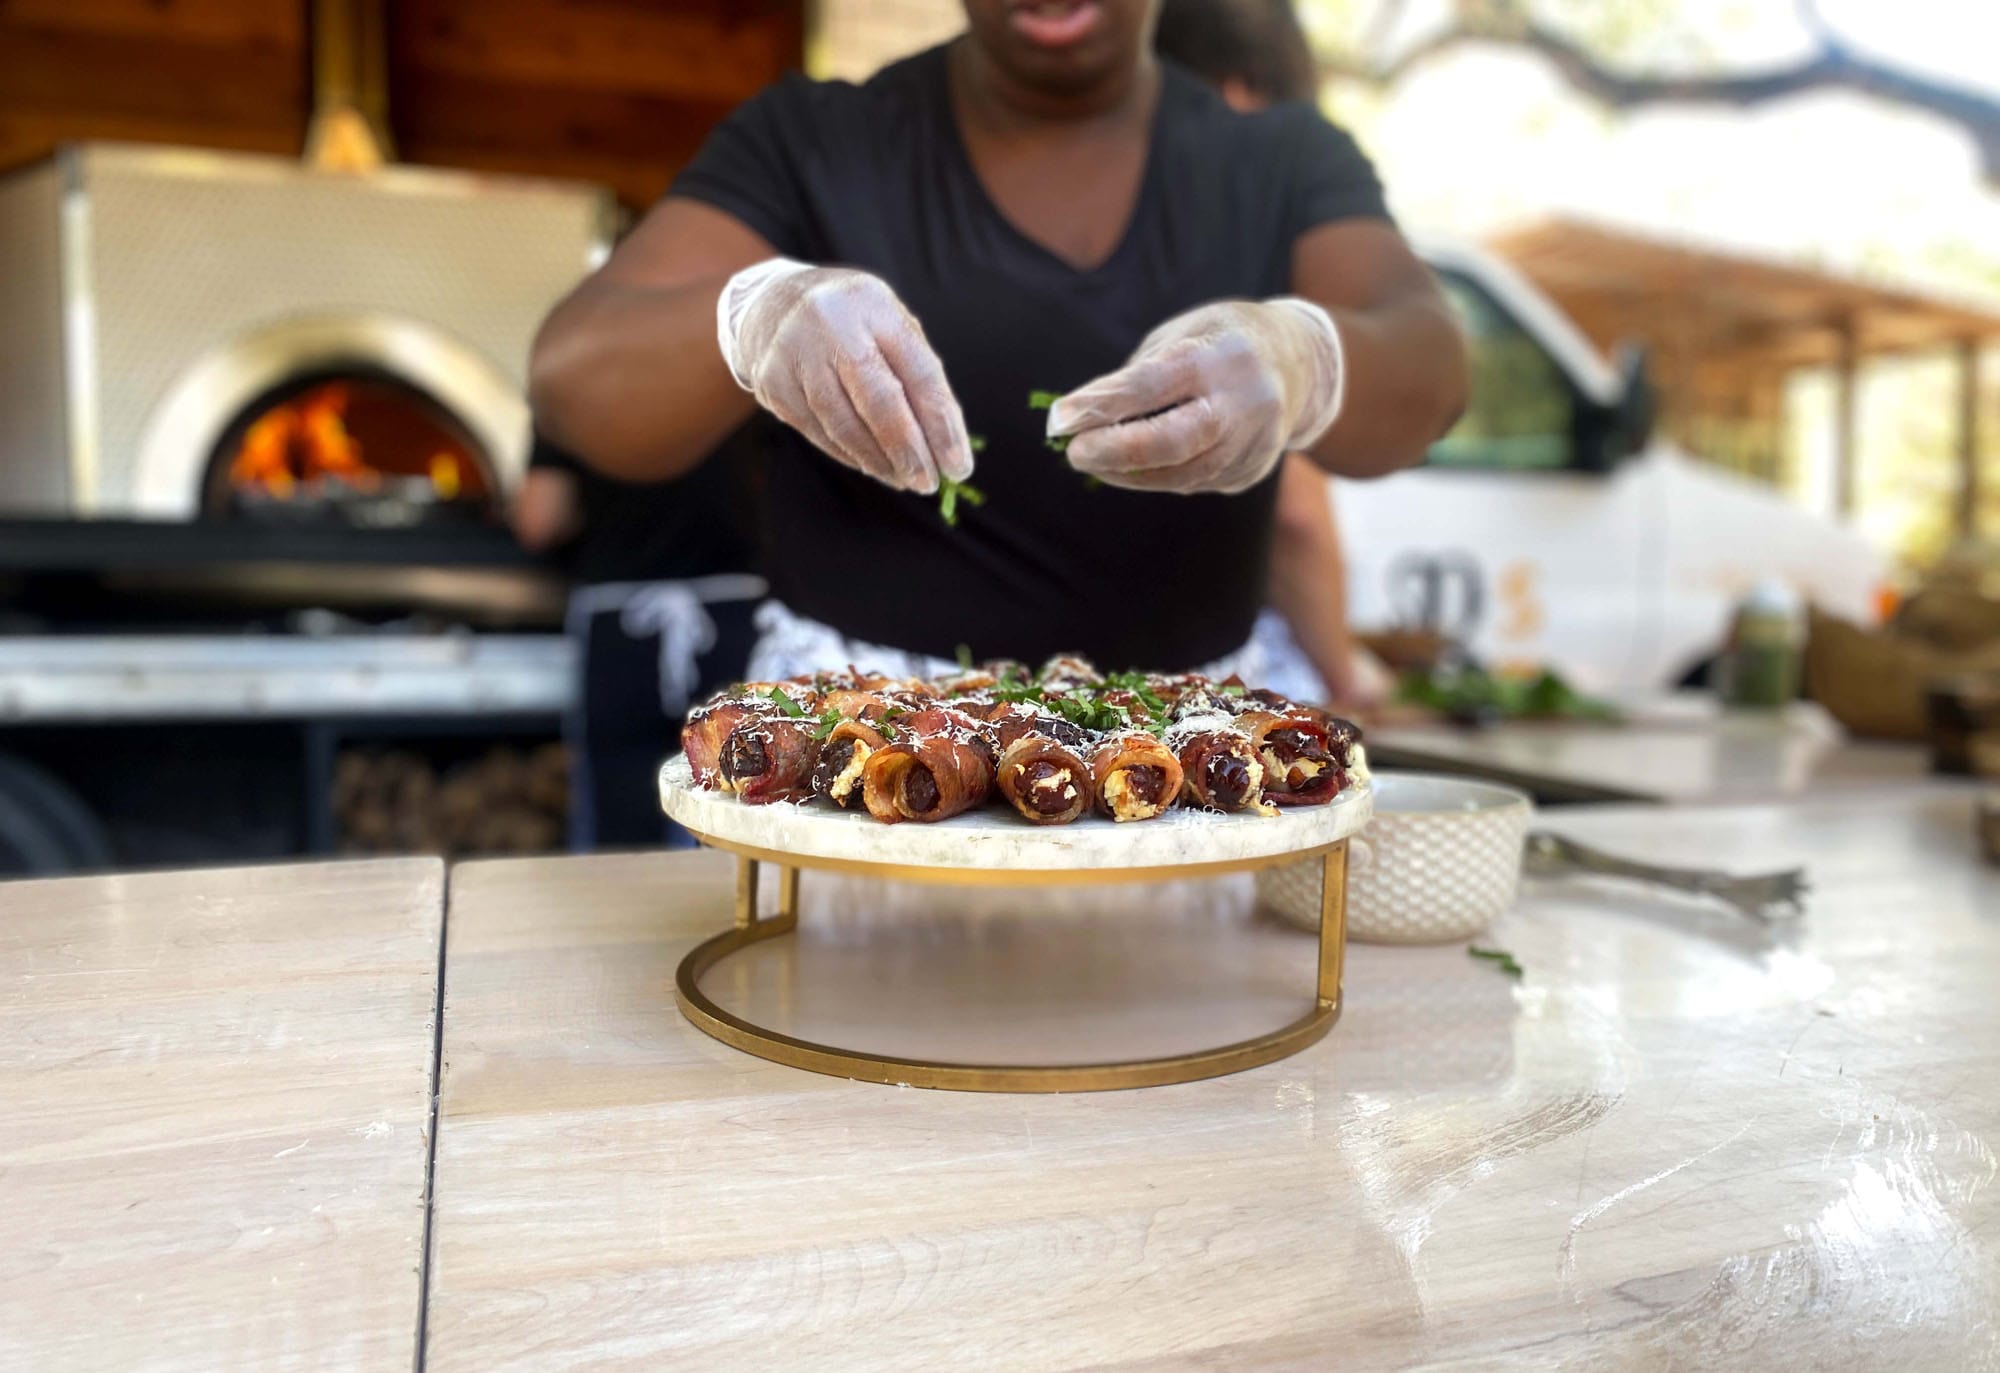 A woman garnishing a plate of bacon wrapped dates.